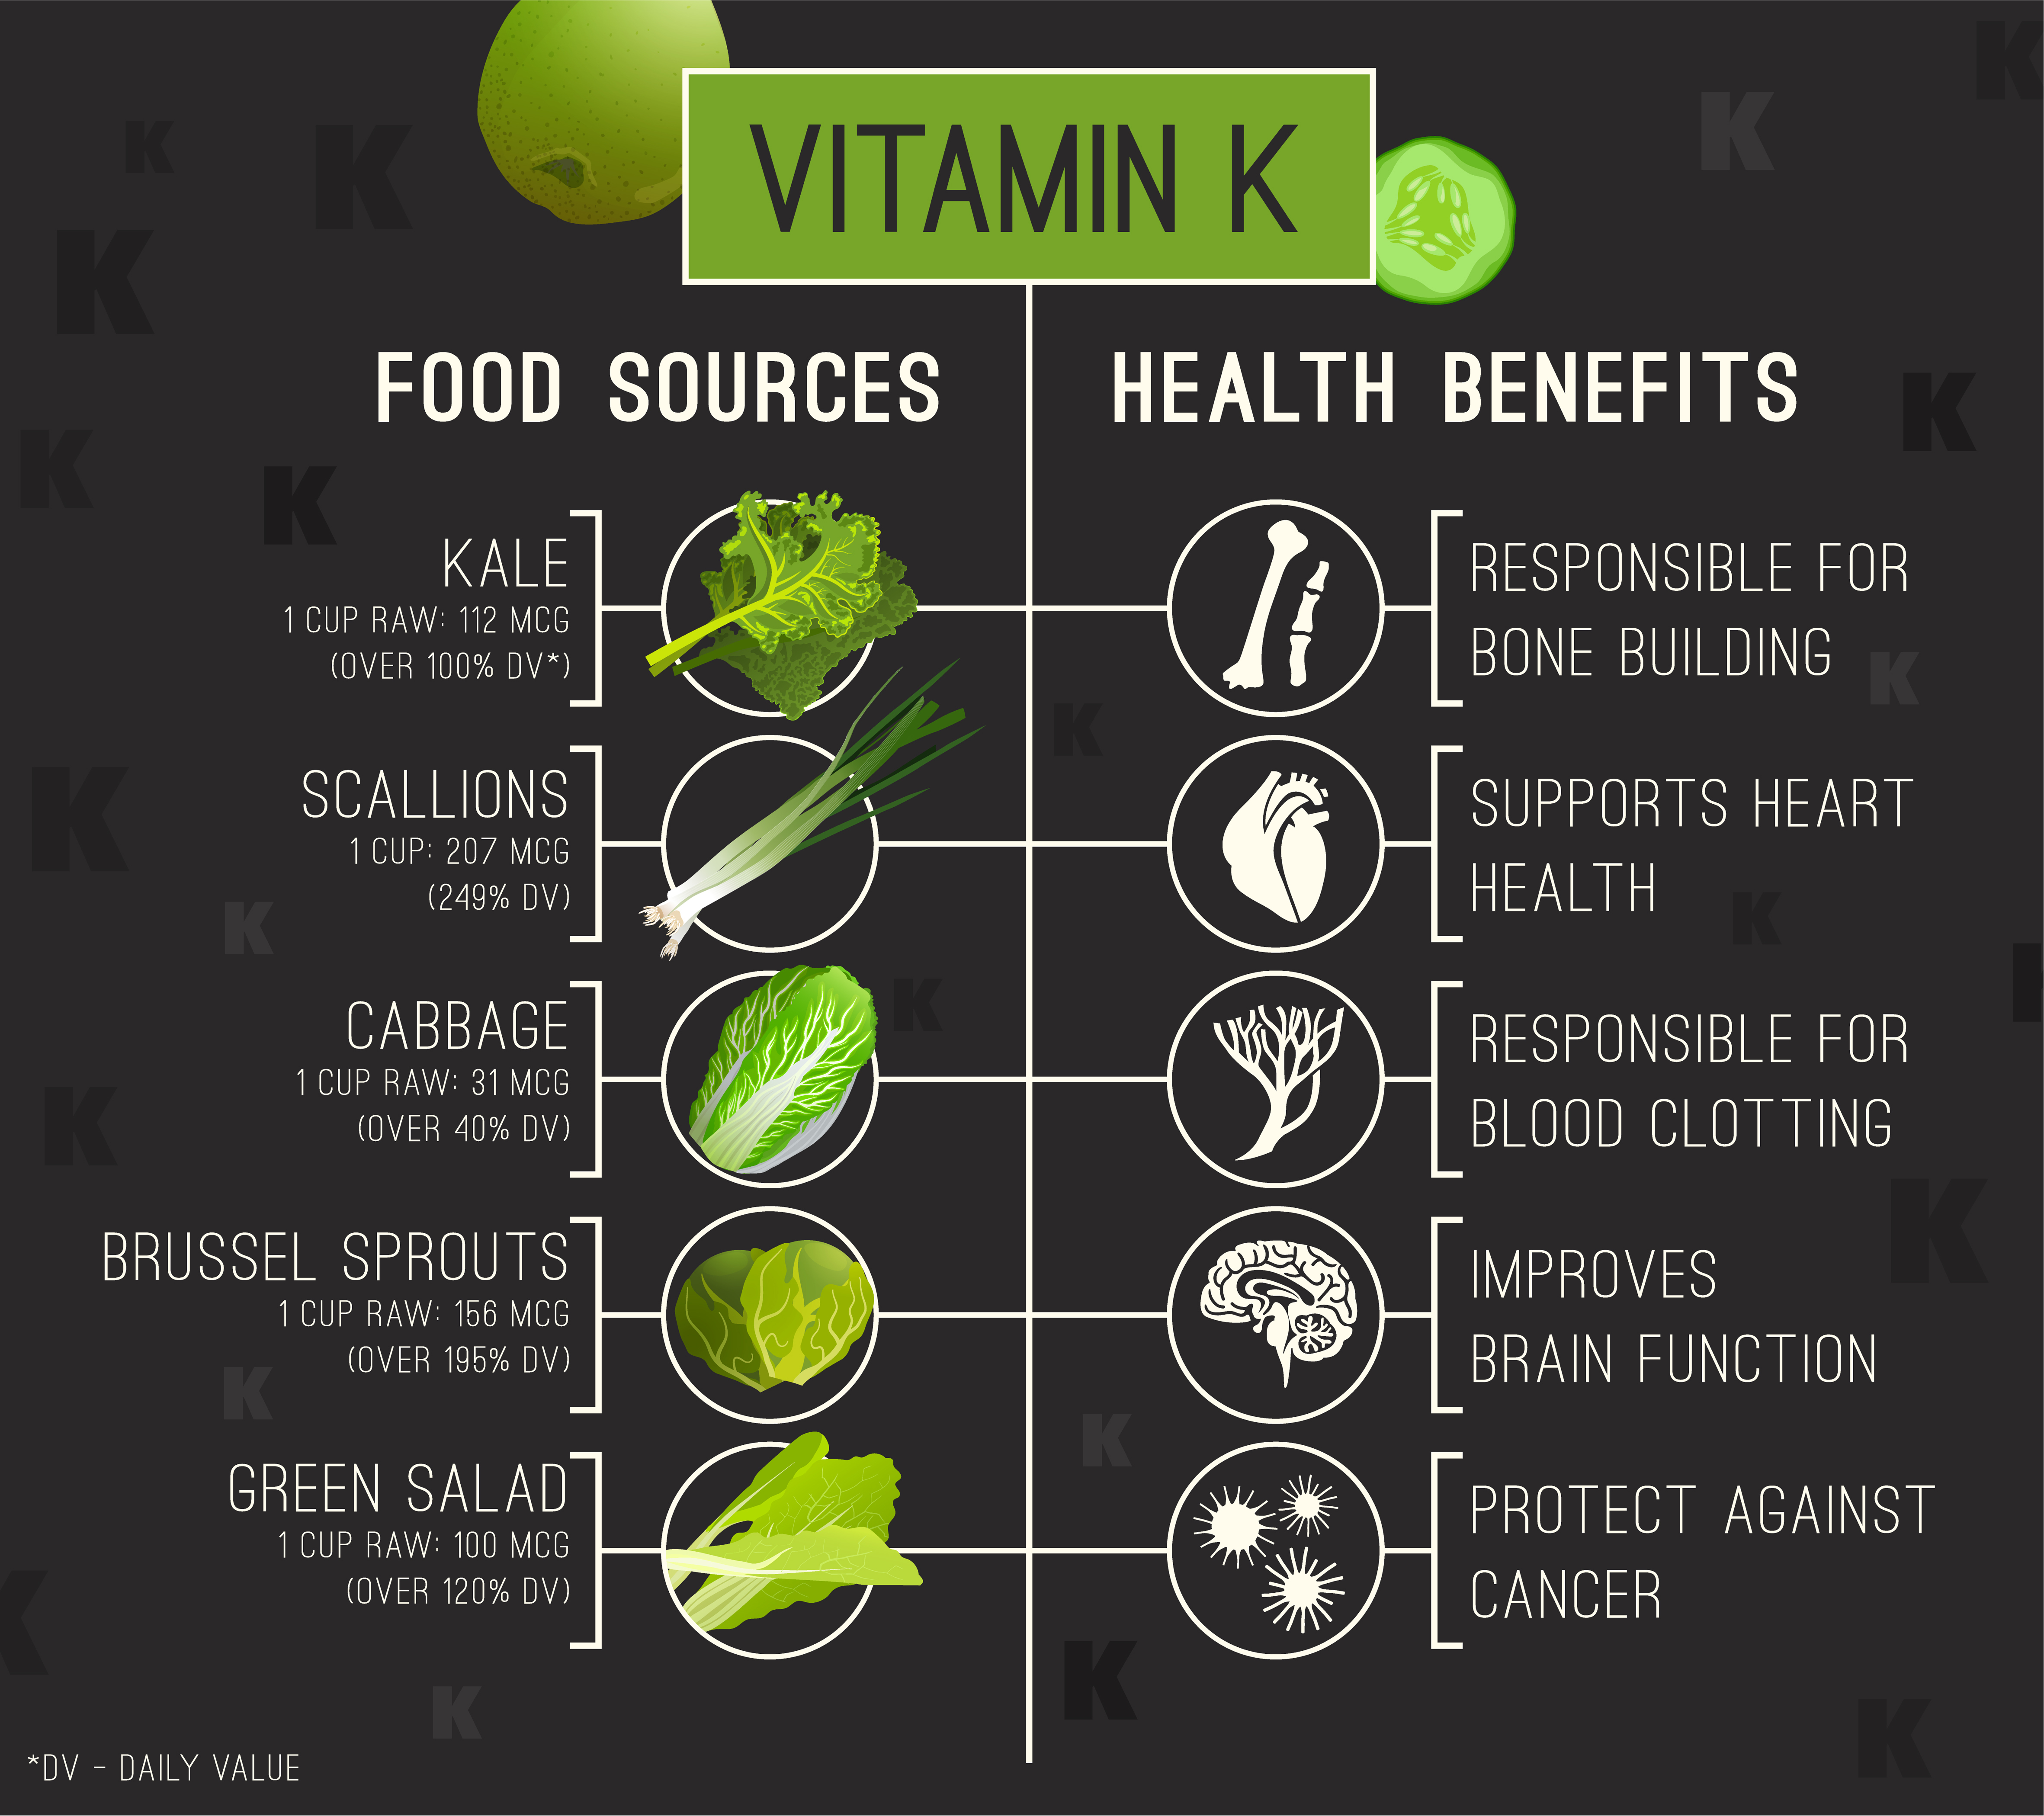 Vitamin K - benefits and sources - infographic